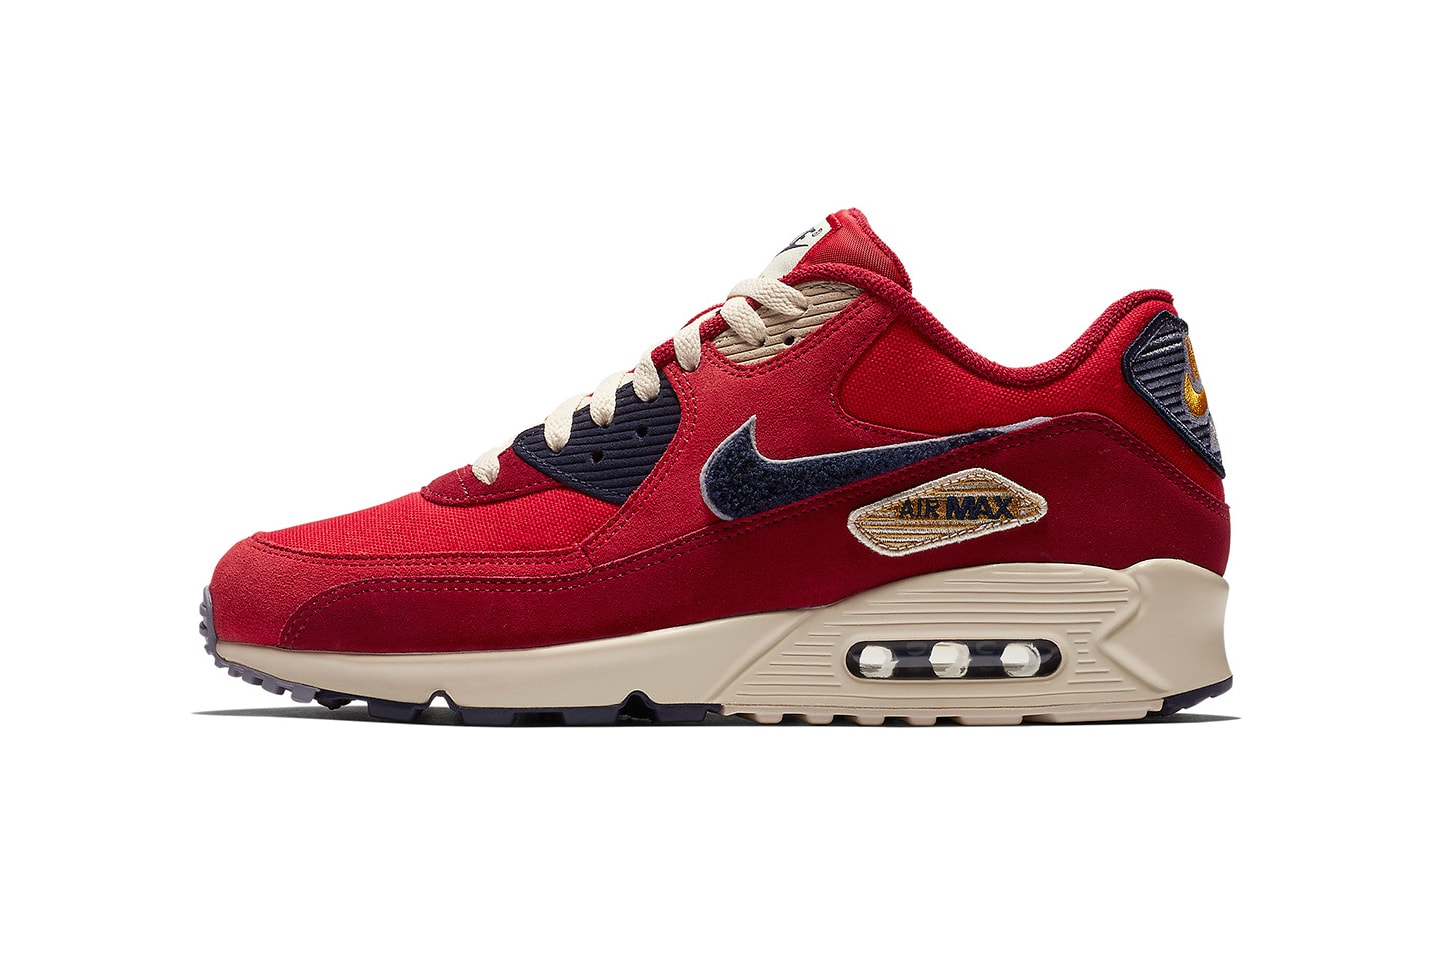 Nike Air Max 90 Chenille swoosh Red Navy colorway drop info release spring summer 2018